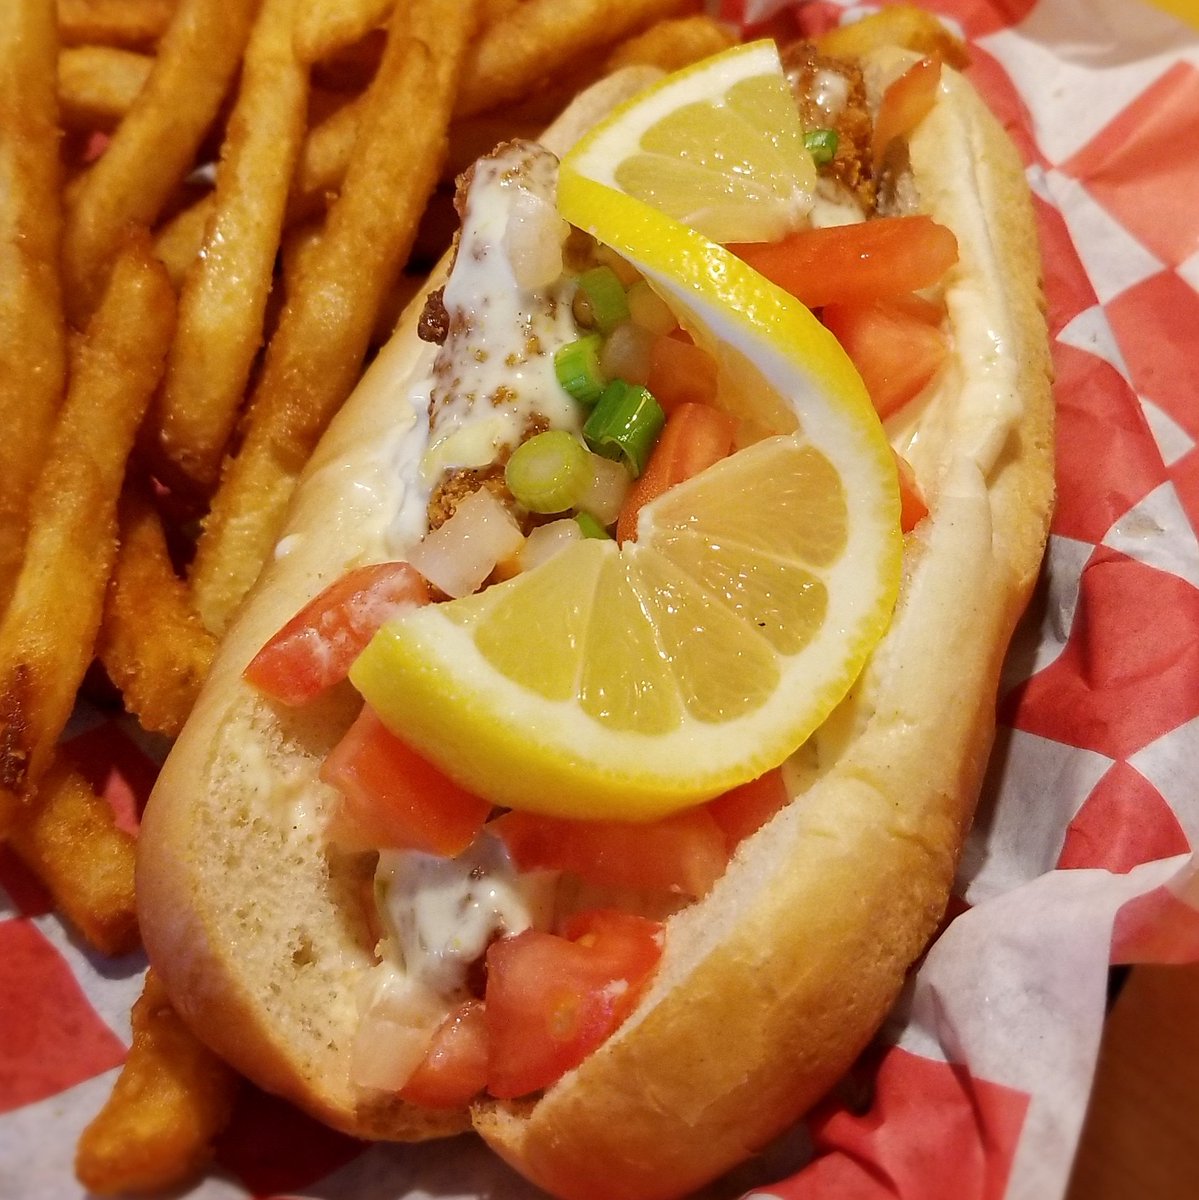 Come rock with us today! Try the Mardi Dog or our March One Hit Wonder, Surfer Rock 🏄‍♂️
🤘💛💚💜
#LundiGras #mardigras @LANorthshore @eatdatnola @LouisianaEats @EaterNOLA